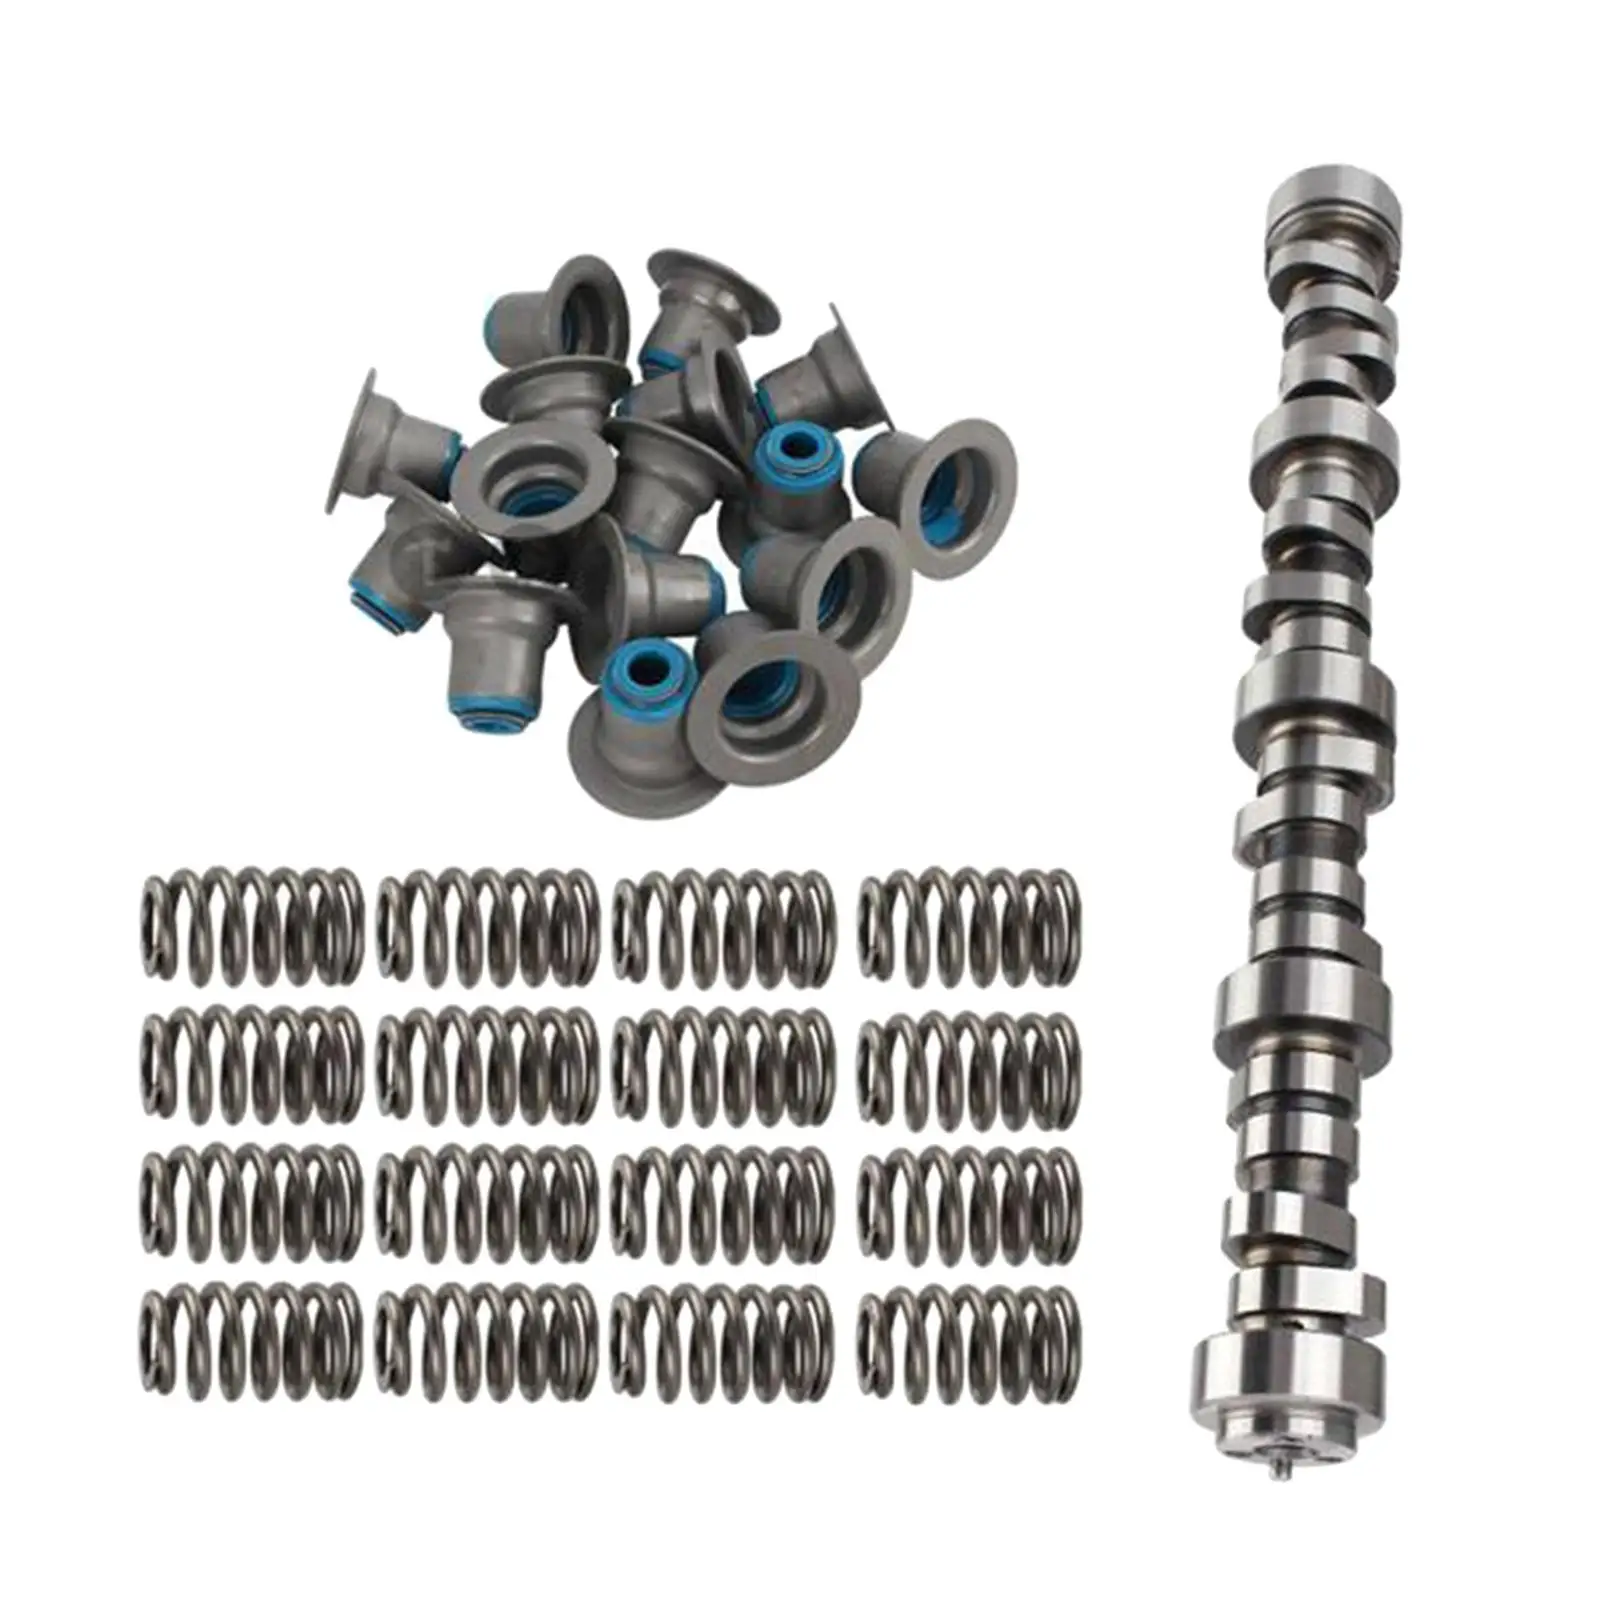 cam Kit Btr31218110 Accessory High Quality Durable Metal Camshaft Kit Replacement for Silverado Stage 2 4.8L 5.3L 6.0L 6.2L